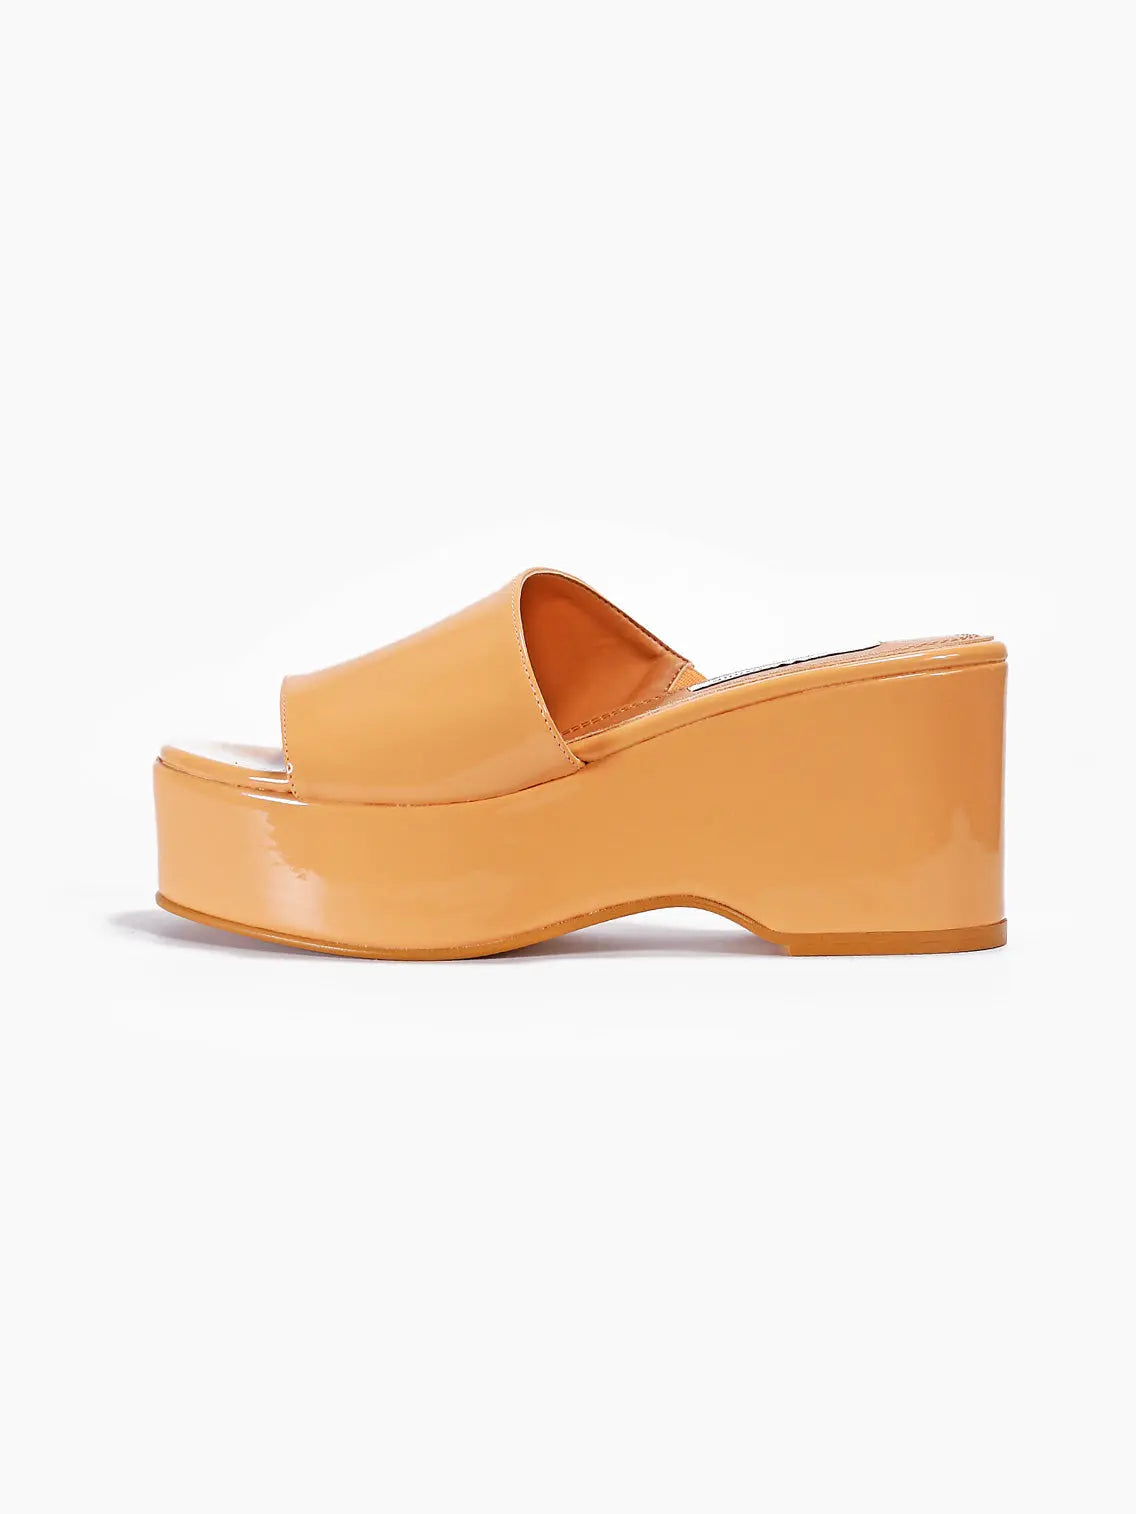 A single Giuliana Peach Sandal with a glossy finish is displayed against a white background. The sandal, available at Bassalstore in Barcelona, features a thick sole and an open-toe design, with a wide strap across the top of the foot and a convenient slip-on style. The brand name is About Arianne.